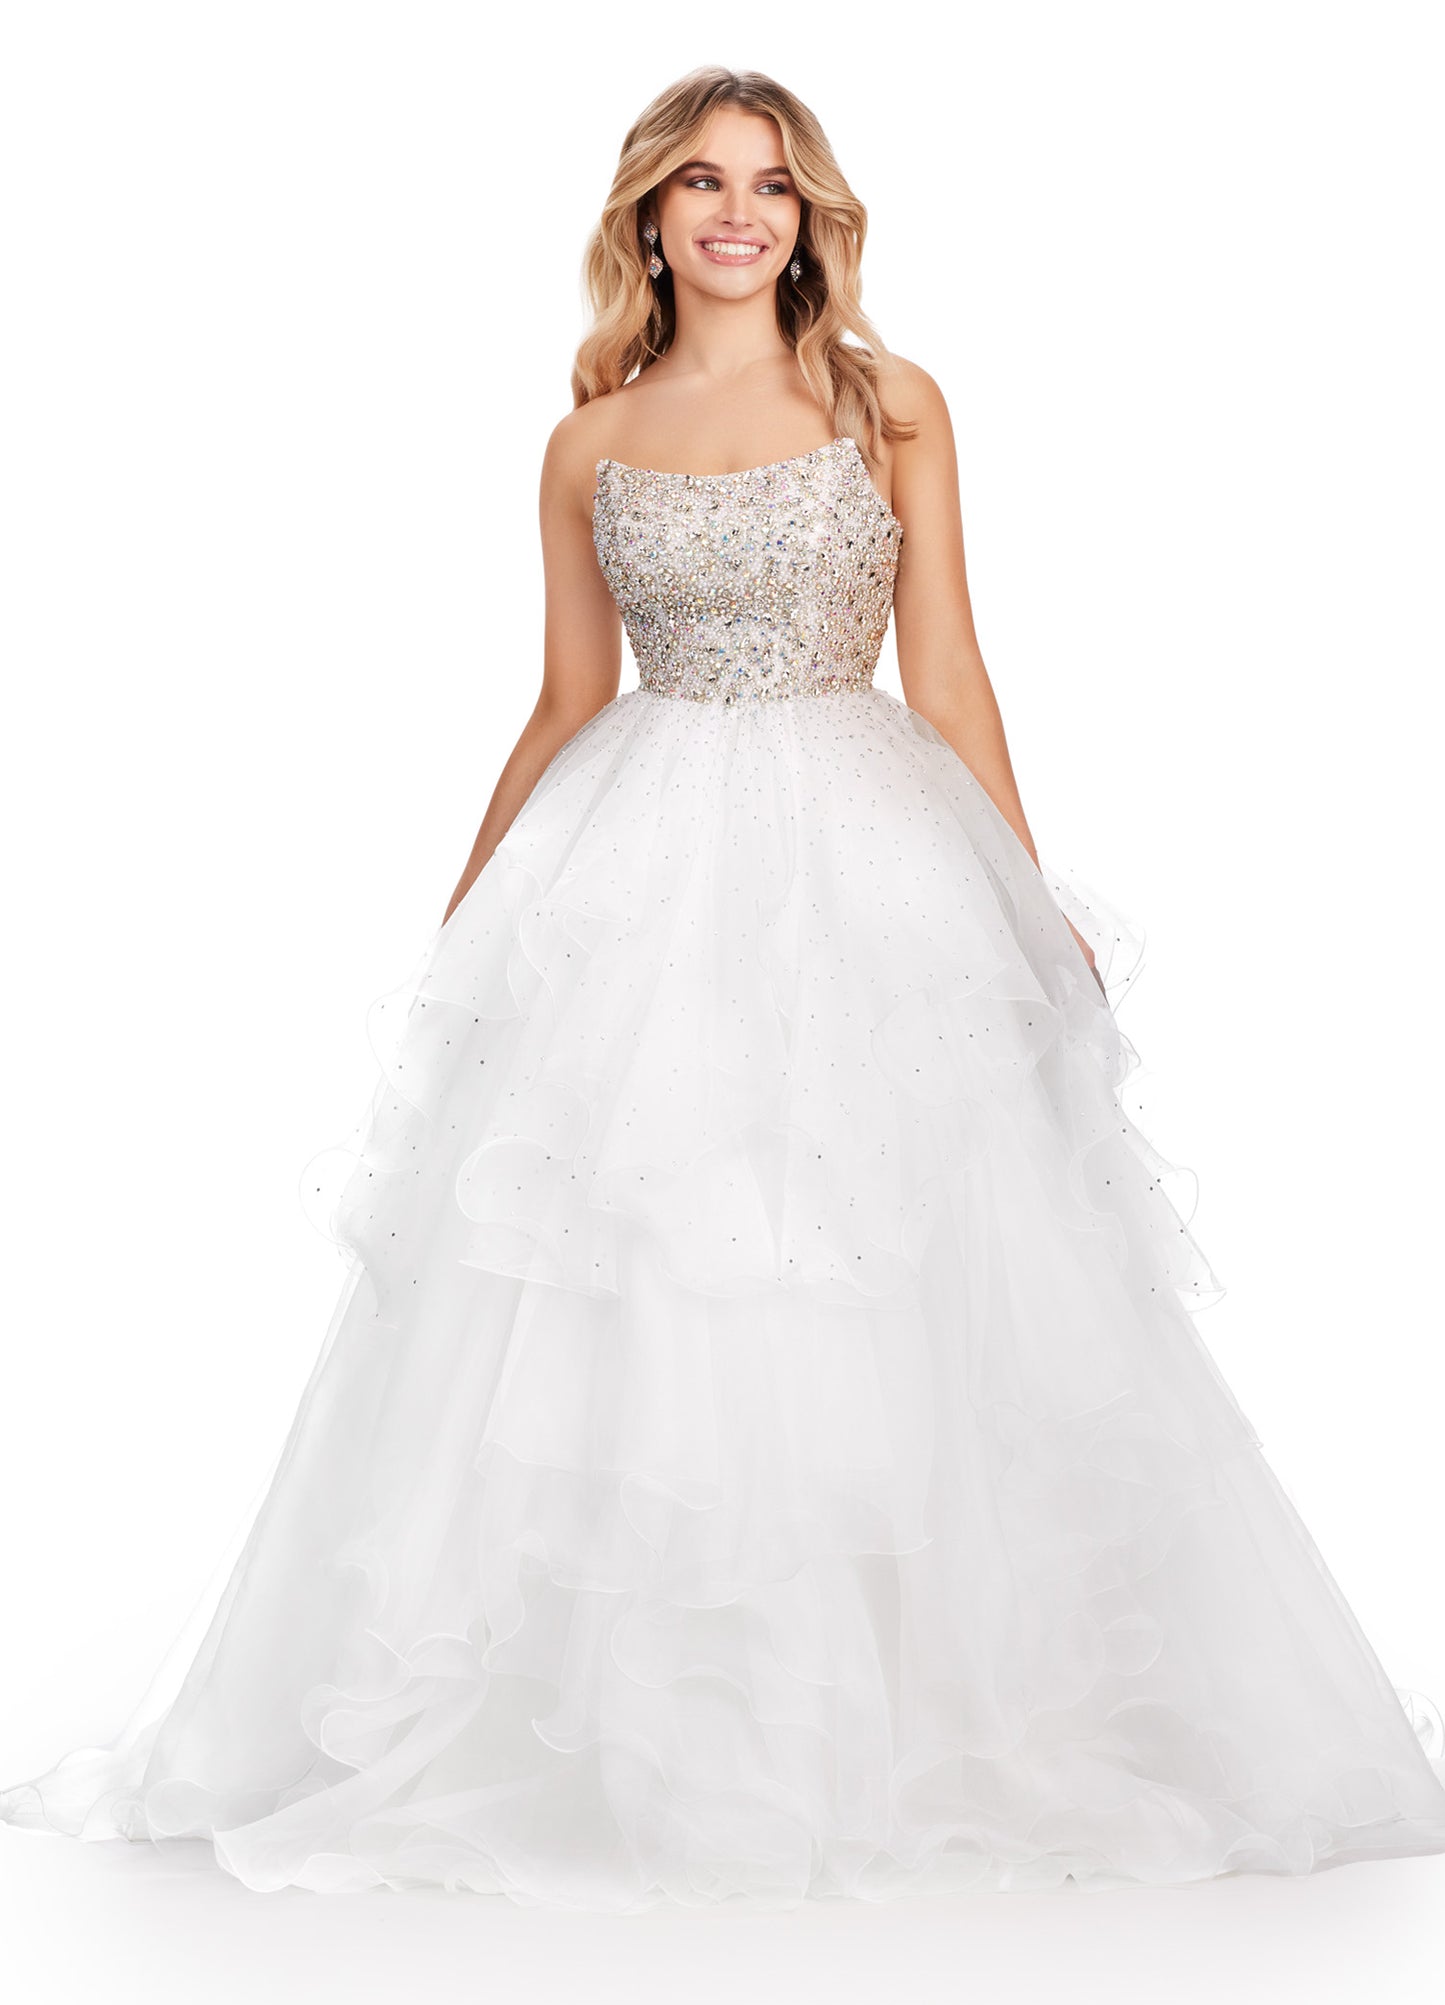 Expertly crafted and designed for a show-stopping appearance, the Ashley Lauren 11545 Long Prom Dress is sure to make you stand out at any formal event. With a strapless organza ball gown silhouette and a beaded bustier, this gown exudes elegance and glamour. Perfect for pageants or prom, this dress will make you feel confident and beautiful. The dreamiest dress! This strapless organza ball gown features a fully beaded bustier and ruffled organza skirt. 